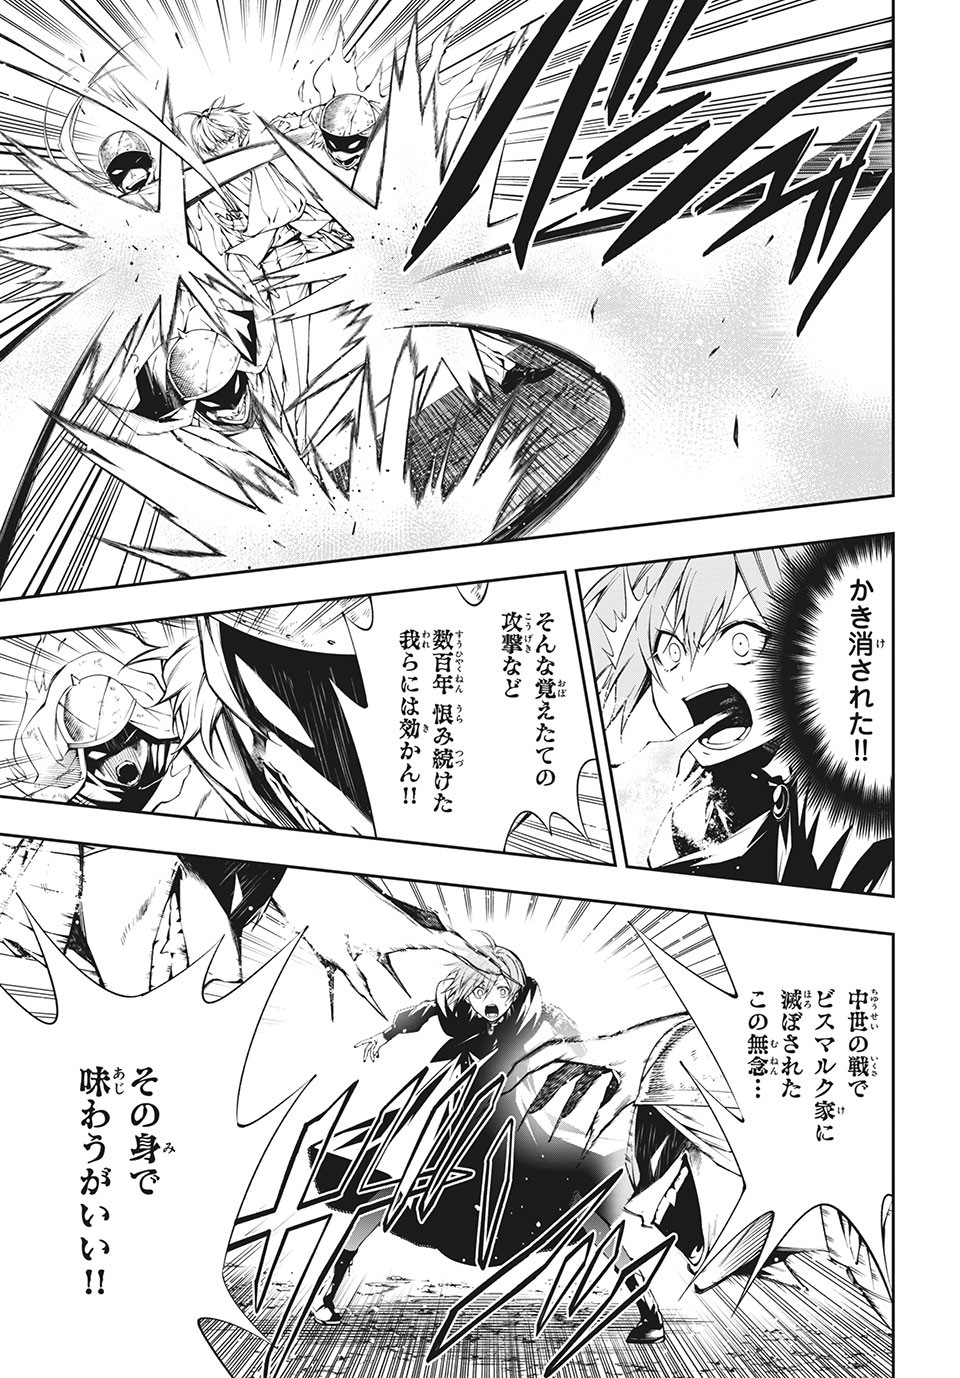 Shaman King: and a garden 第4.3話 - Page 1